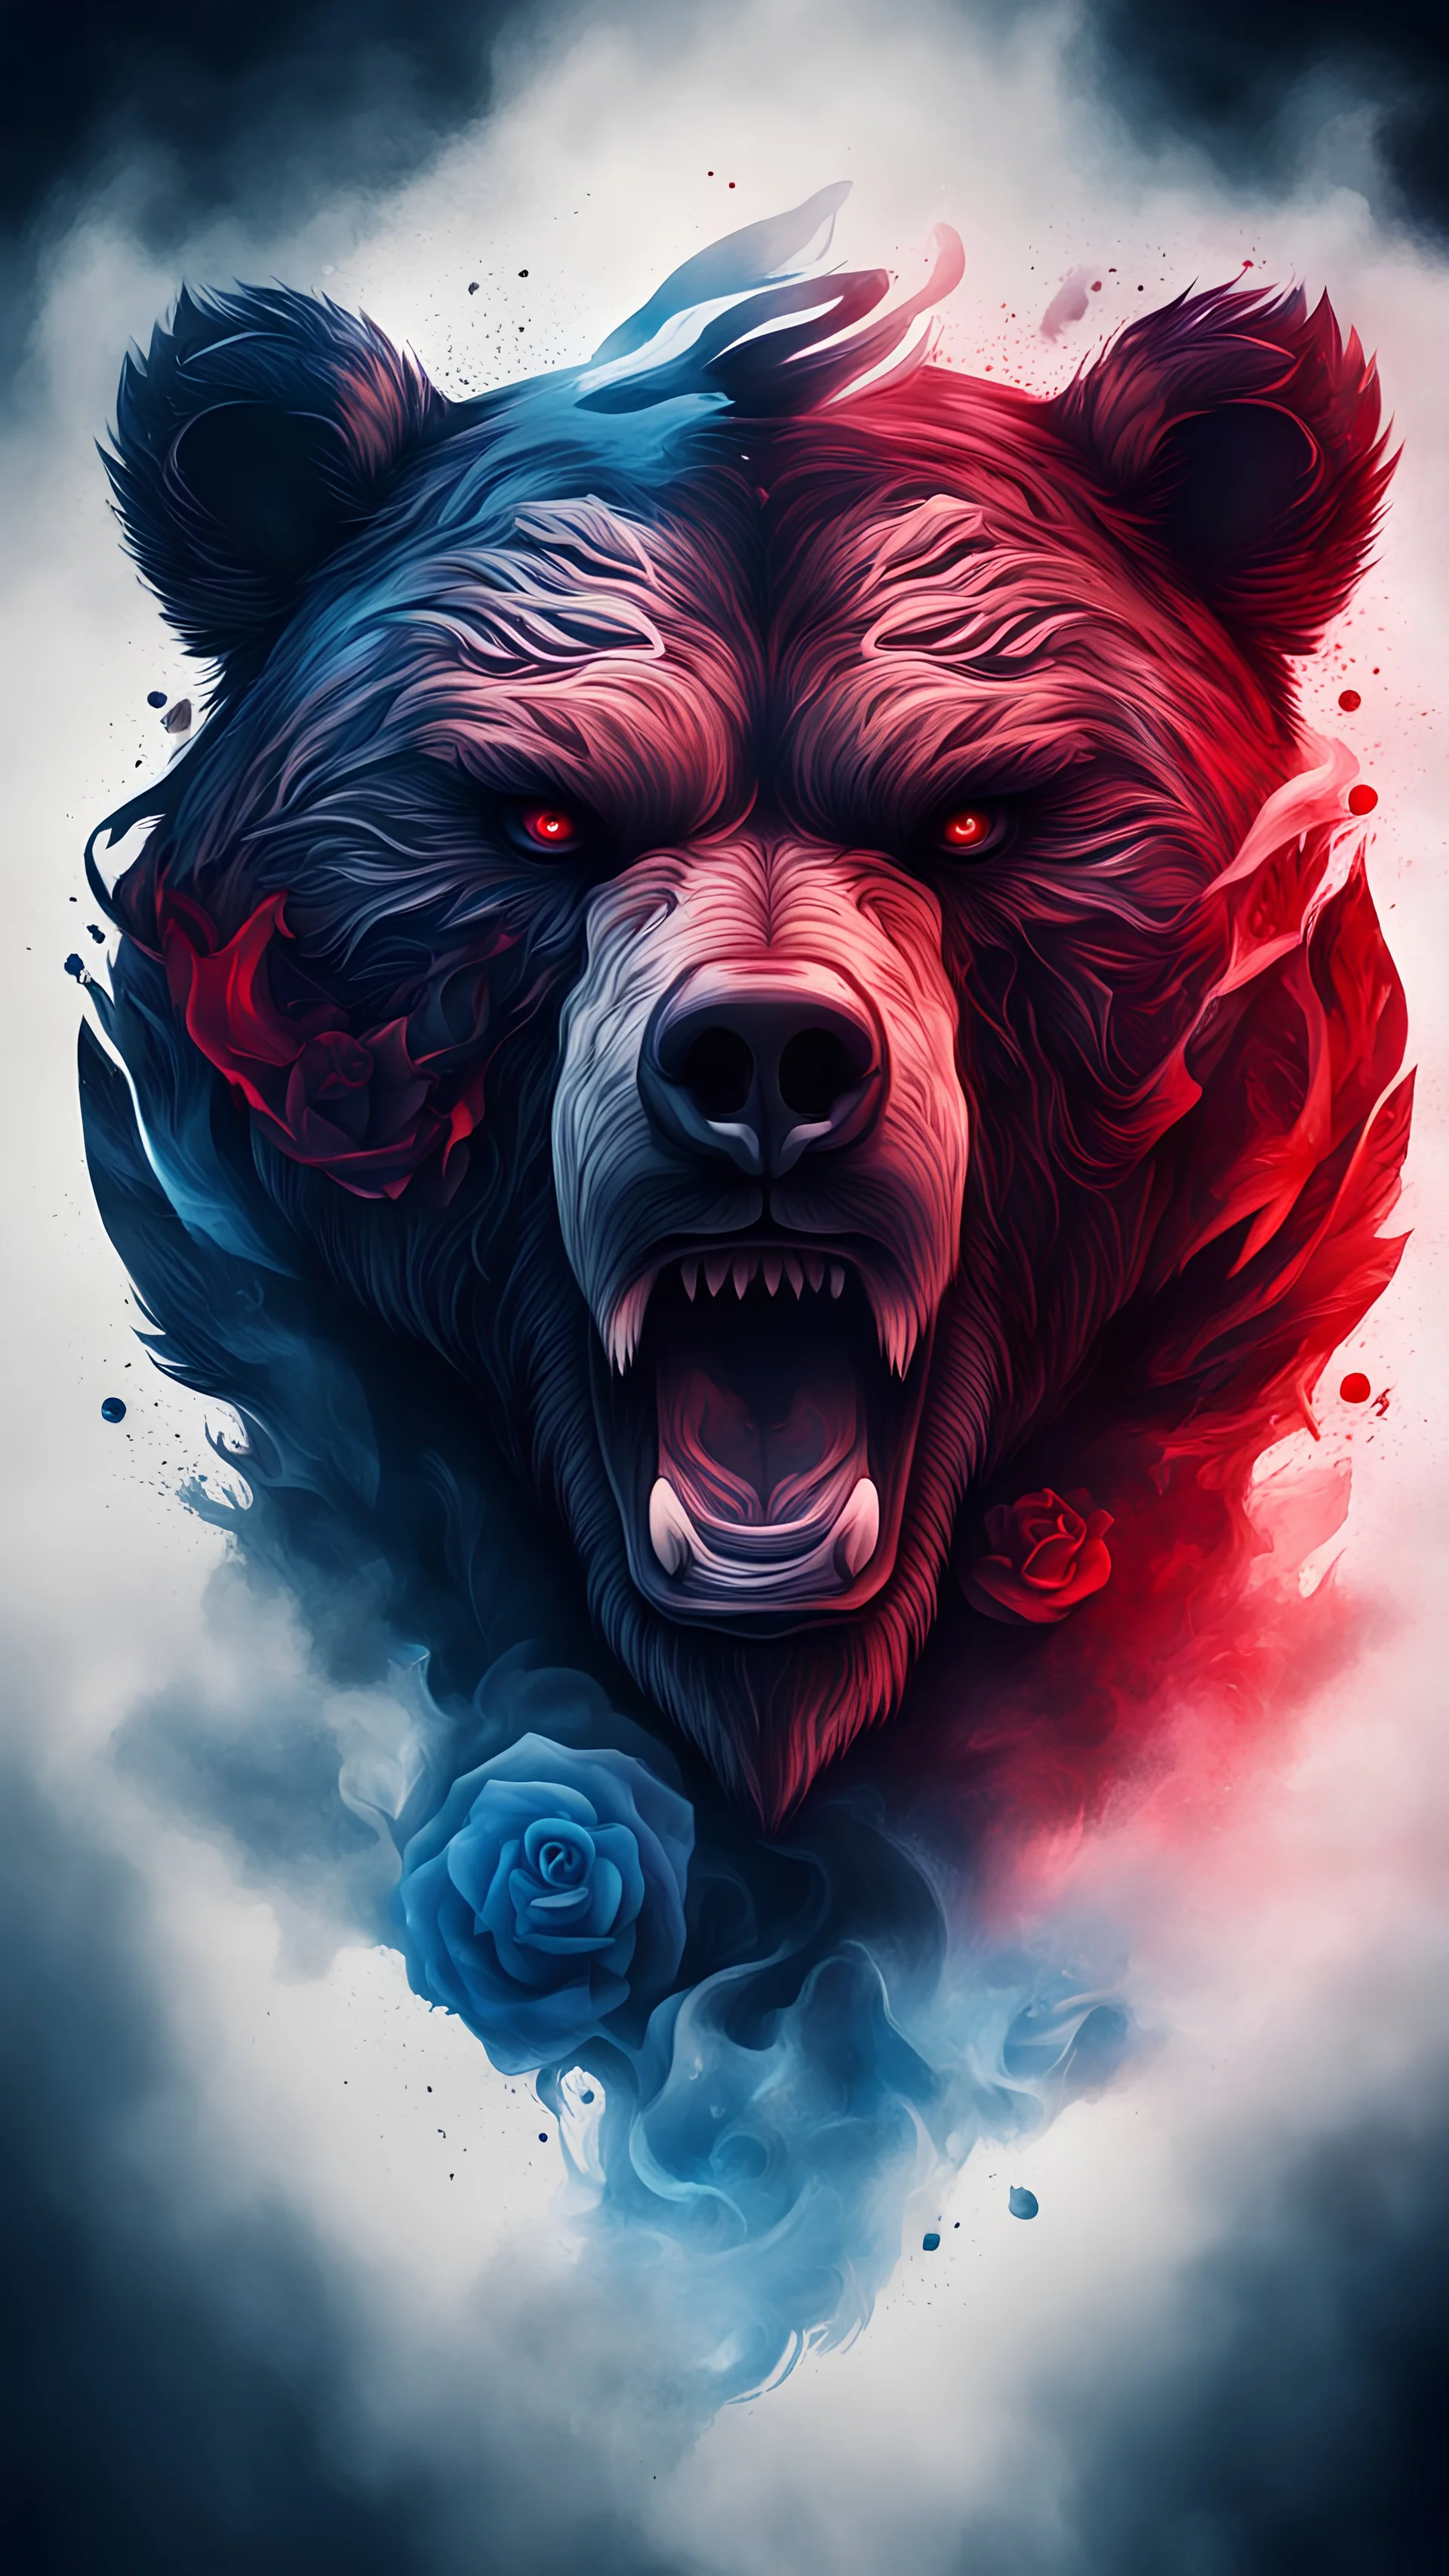 2D image of abstract angry bear head symbol tattoo with rose element,blue and red tone light,motions fog smoke on dark cinematic background